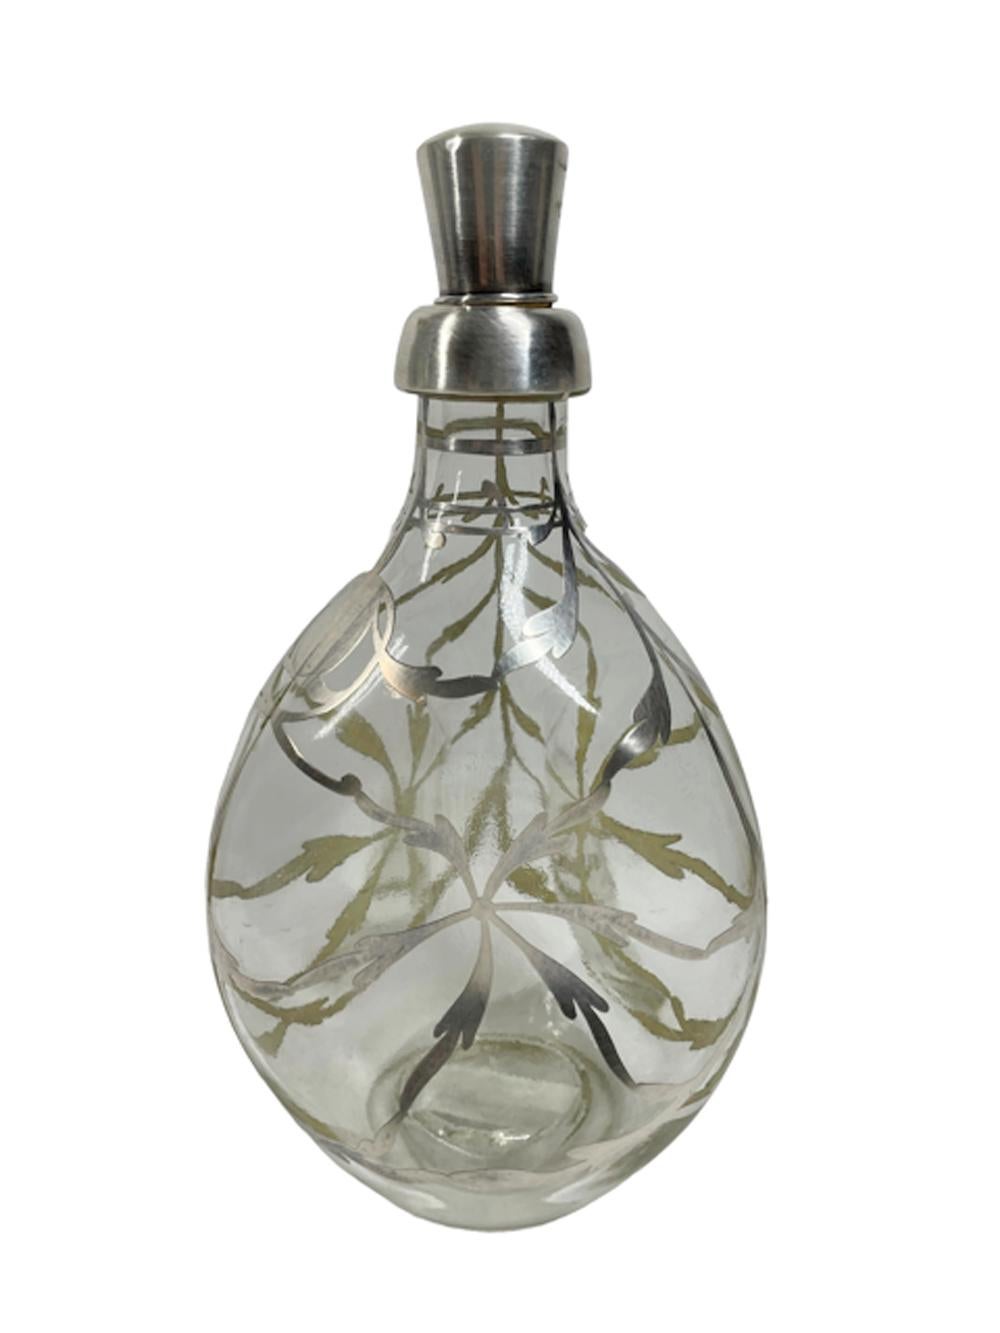 19th Century Art Nouveau Silver Overlay Pinch Decanter with Scrolling Leaf Decoration For Sale